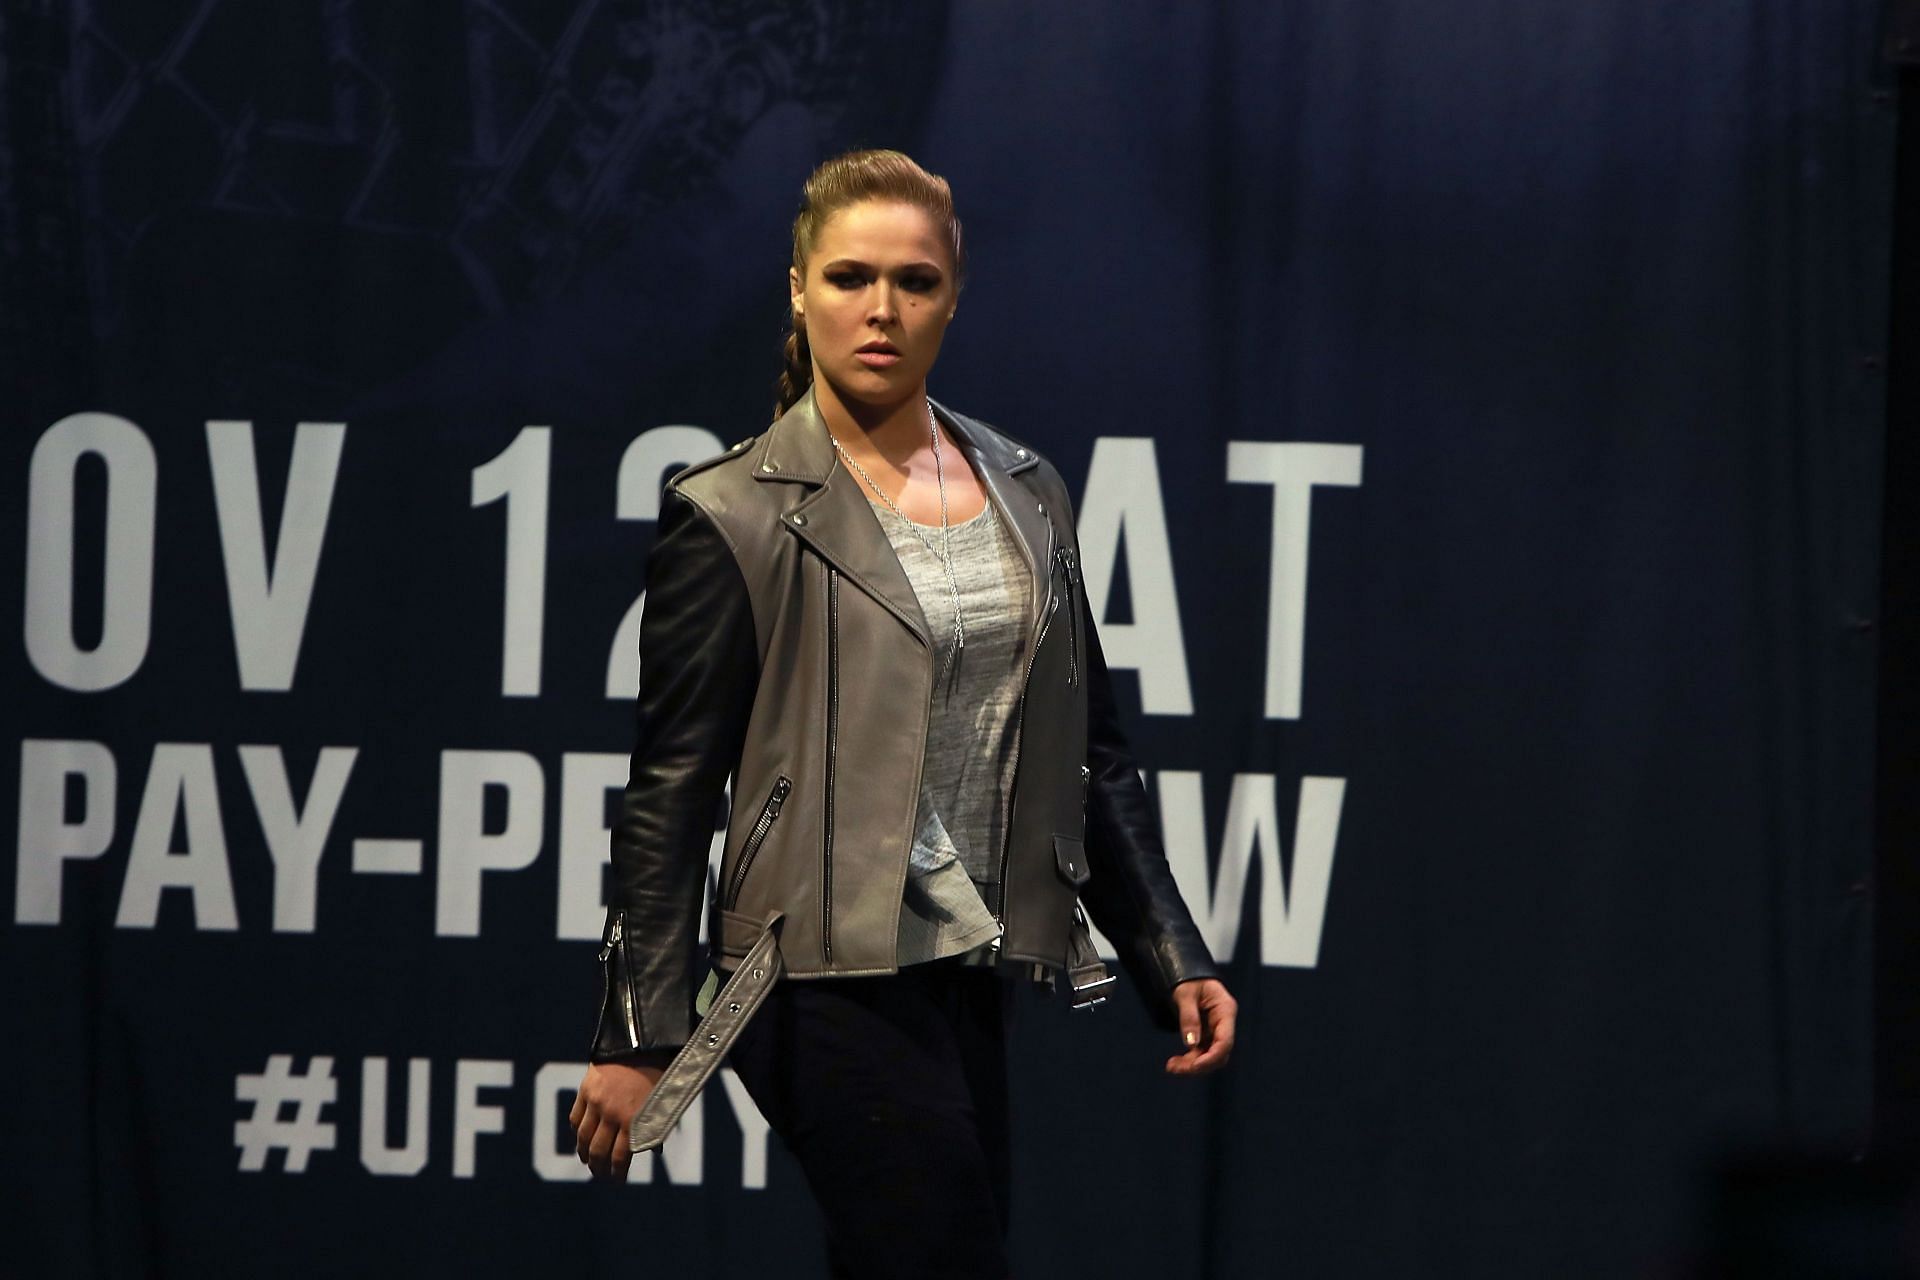 &#039;Rowdy&#039; Ronda Rousey was among the first women to main event WrestleMania